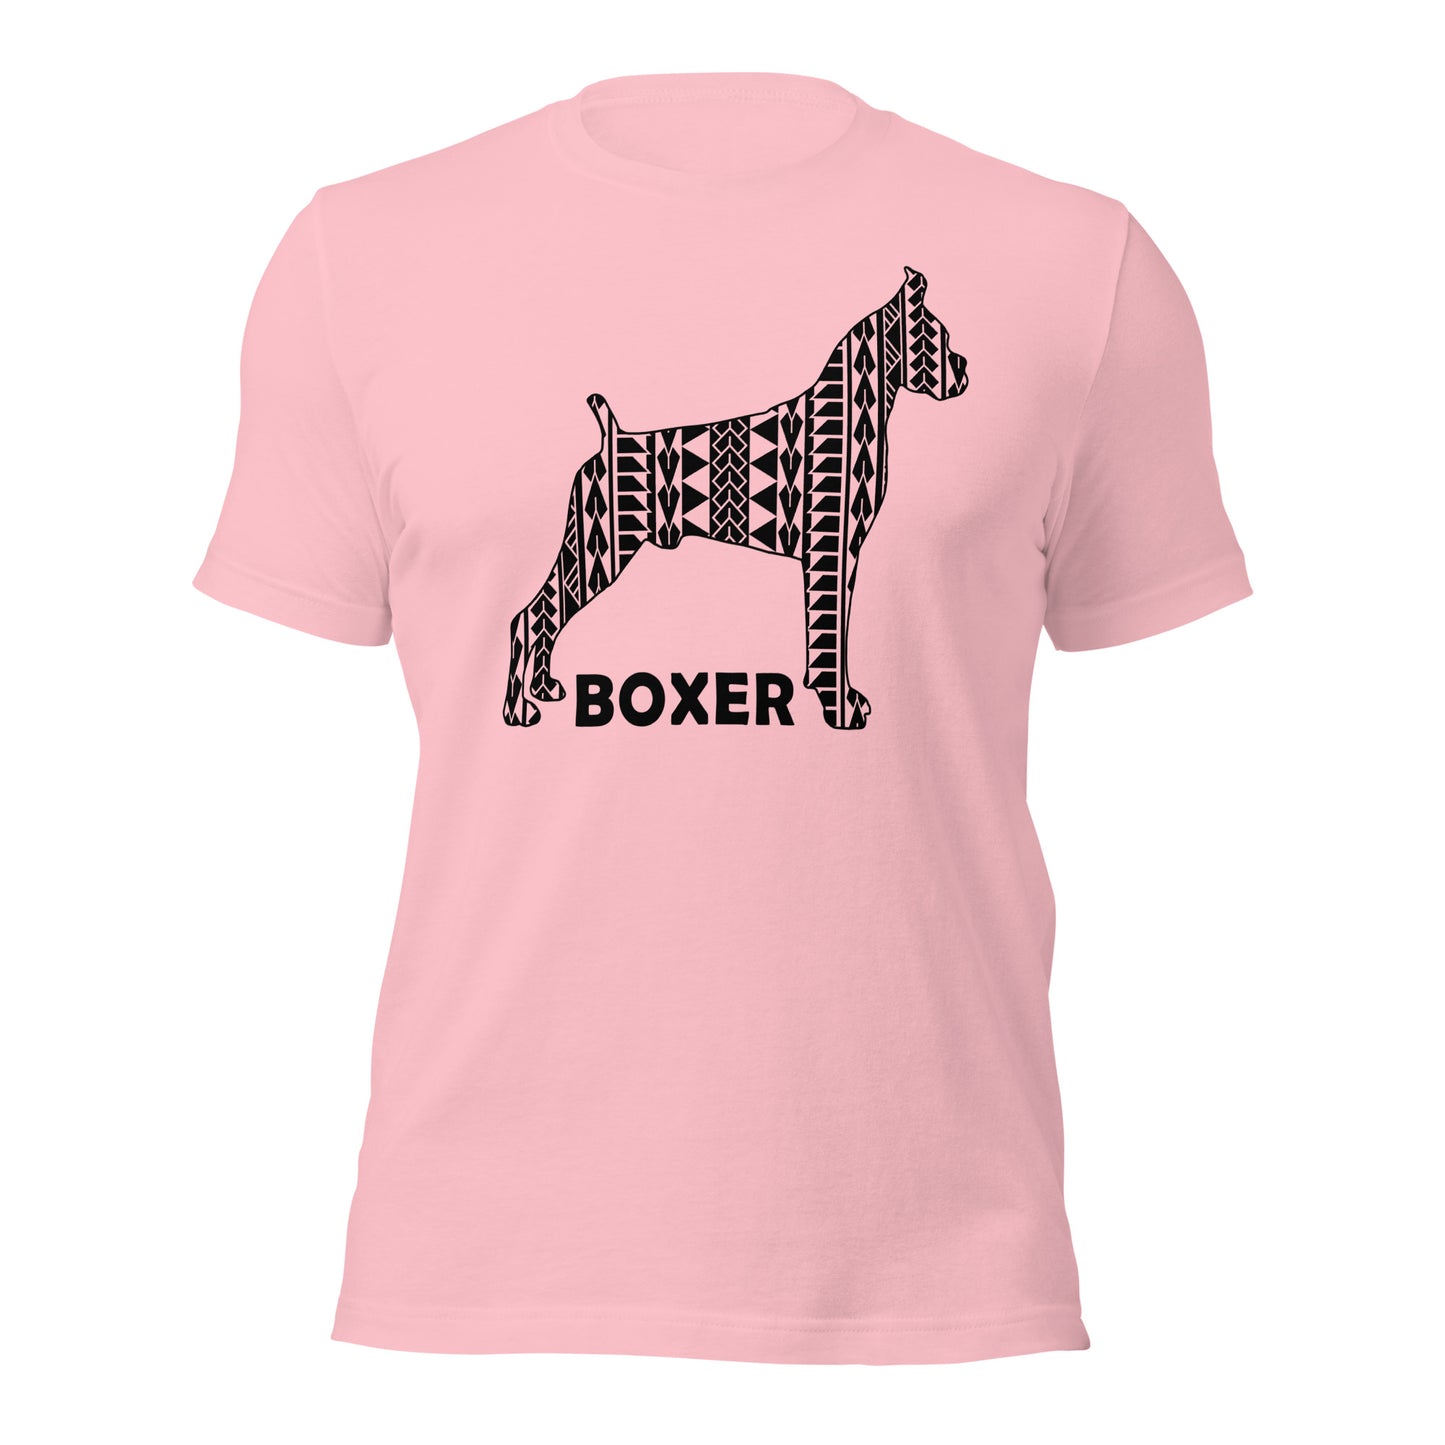 Boxer Polynesian t-shirt pink by Dog Artistry.